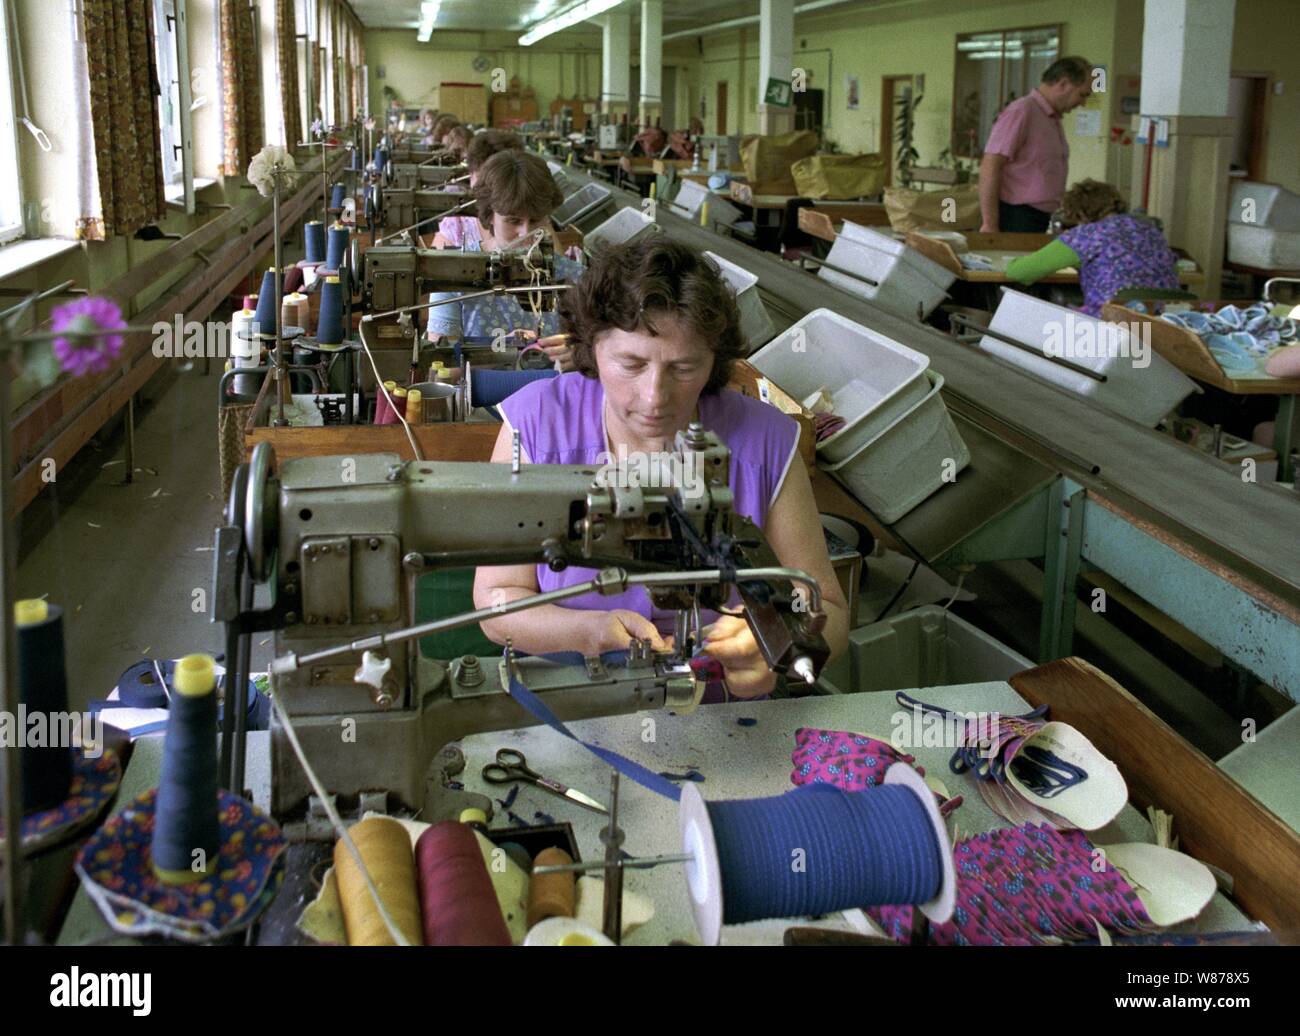 01 January 1990, Berlin, Luckenwalde: The Luckenwalder shoe factory produced sports shoes for the Soviet Union. The company was not for sale in 1990. The photo shows how small the workplaces were automated, low productivity. Best possible image quality, exact shooting date unknown. Photo: Paul Glaser/dpa-Zentralbild/ZB Stock Photo